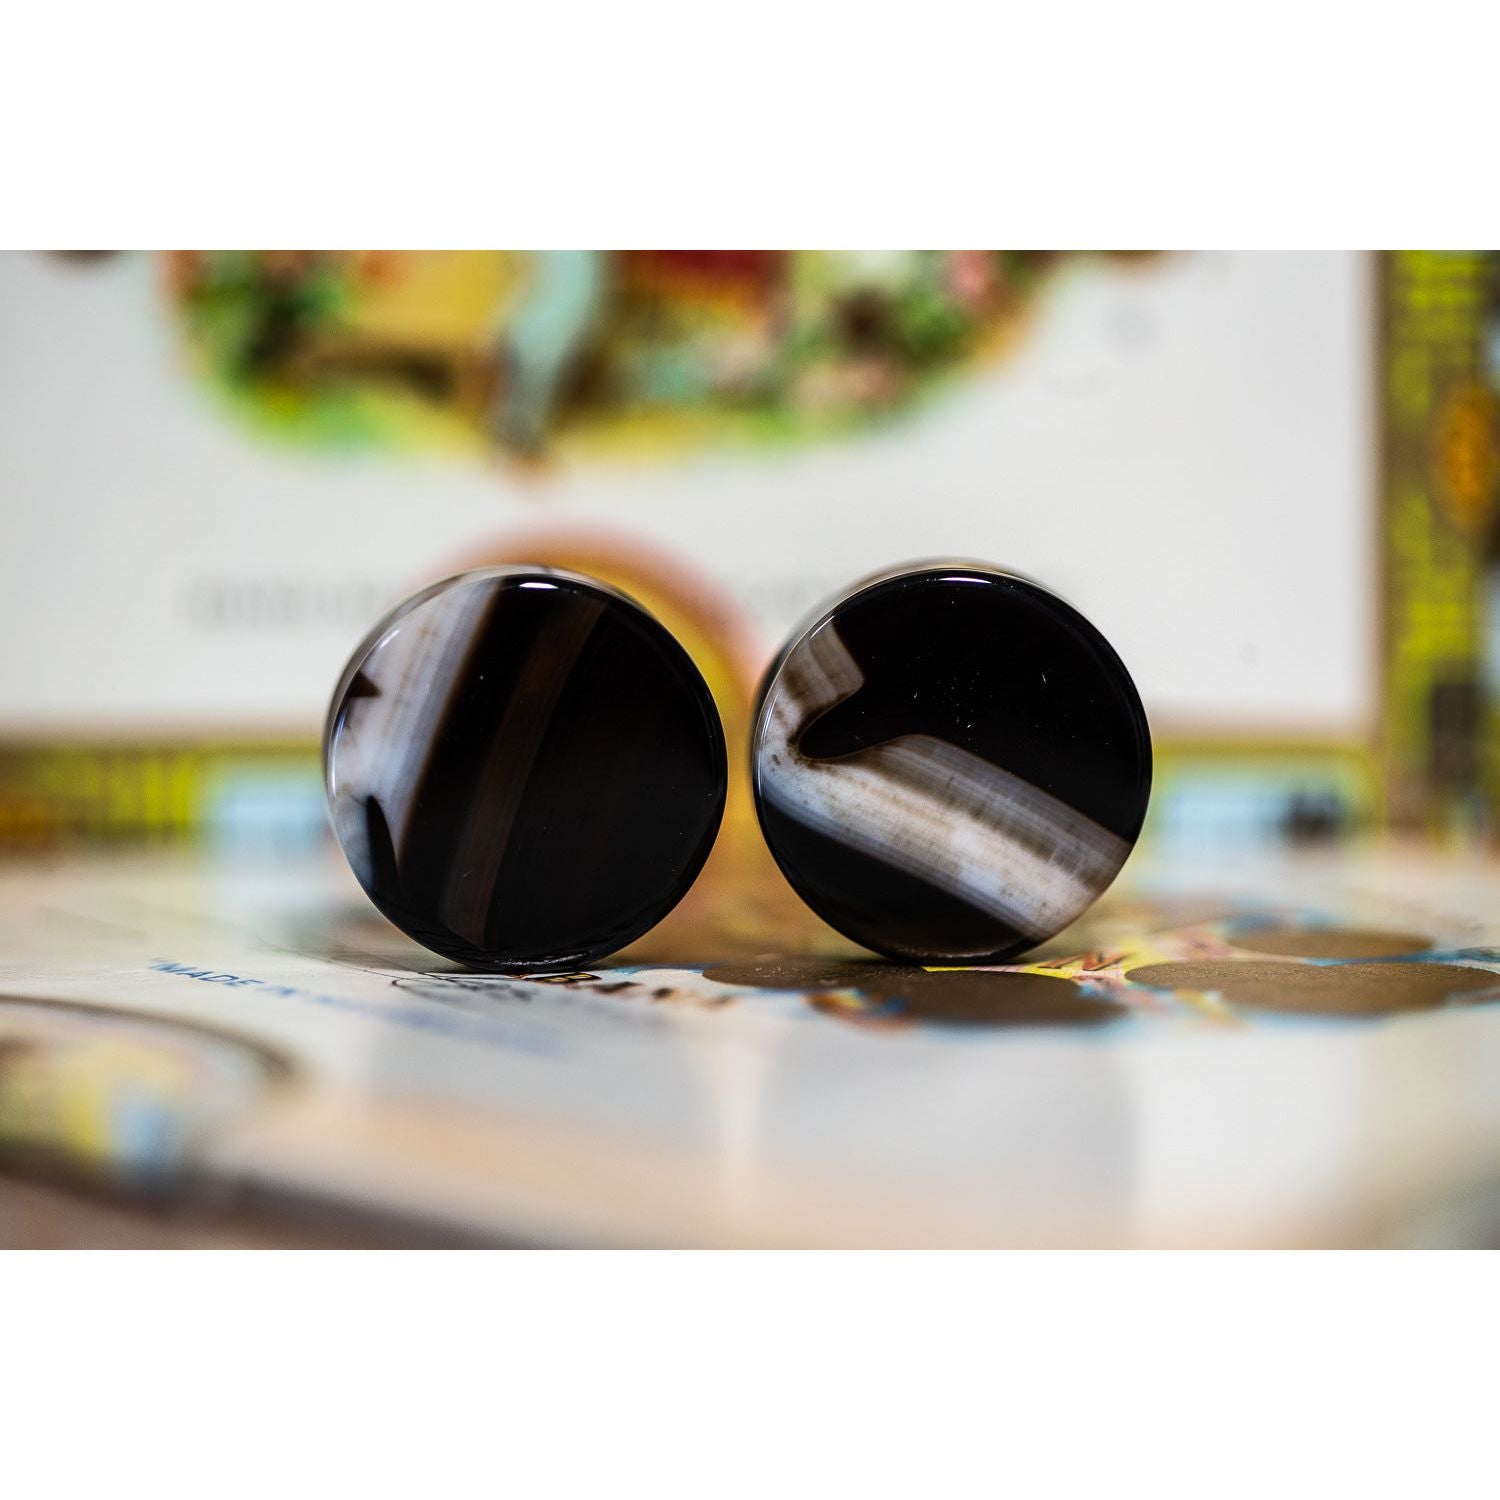 Black Striped Agate Plugs, Double Flared Pair, Organic Plugs - 70 Knots